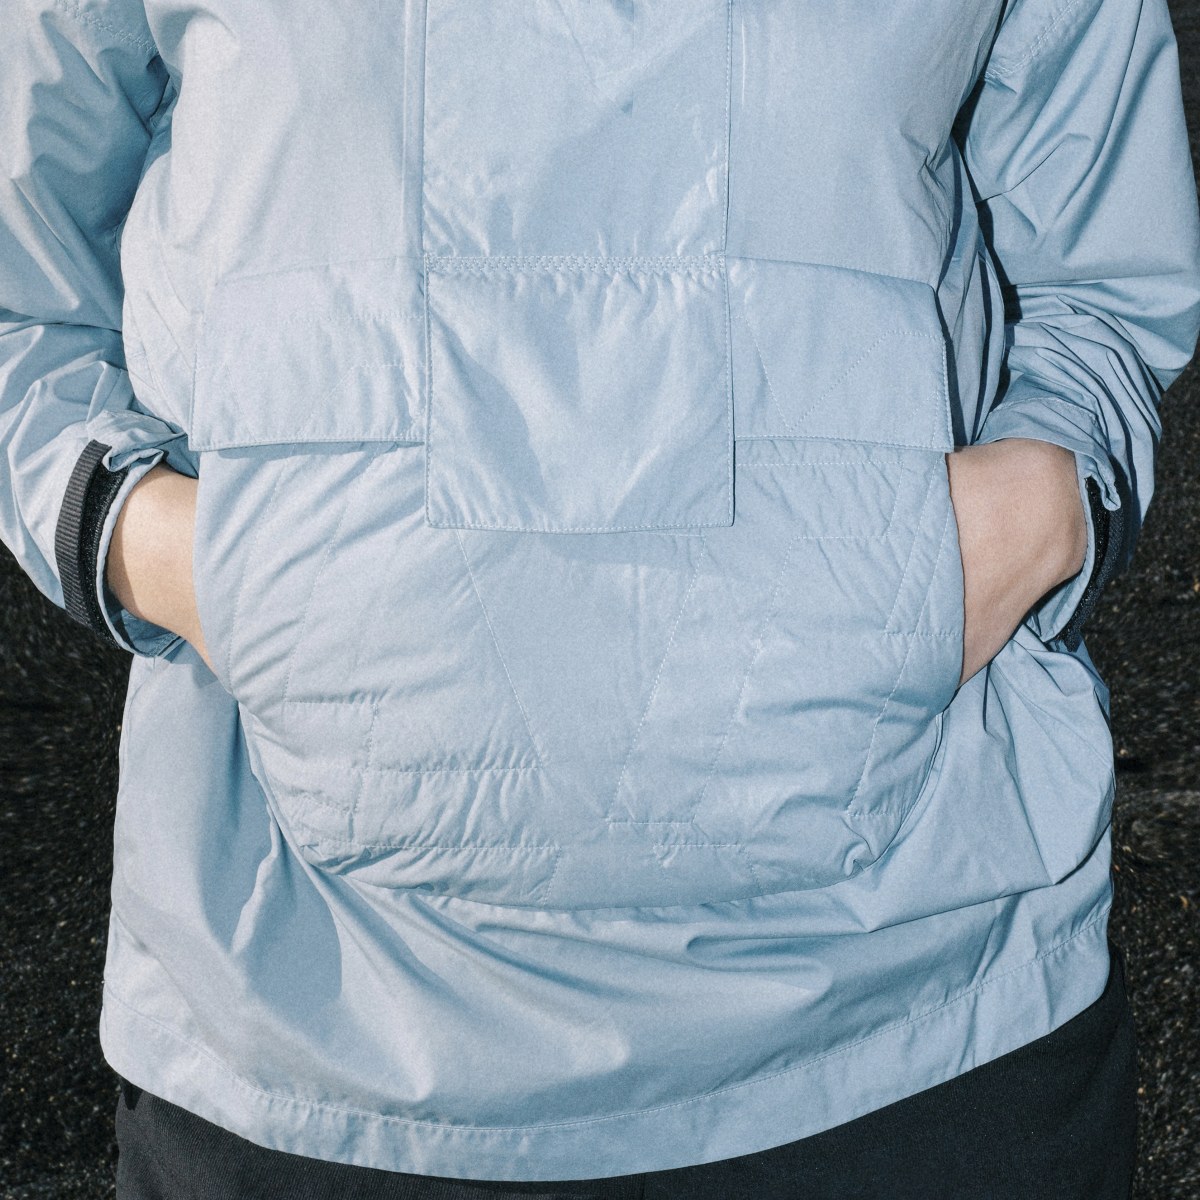 Adidas Anorak Terrex Made to be Remade Wind. 5